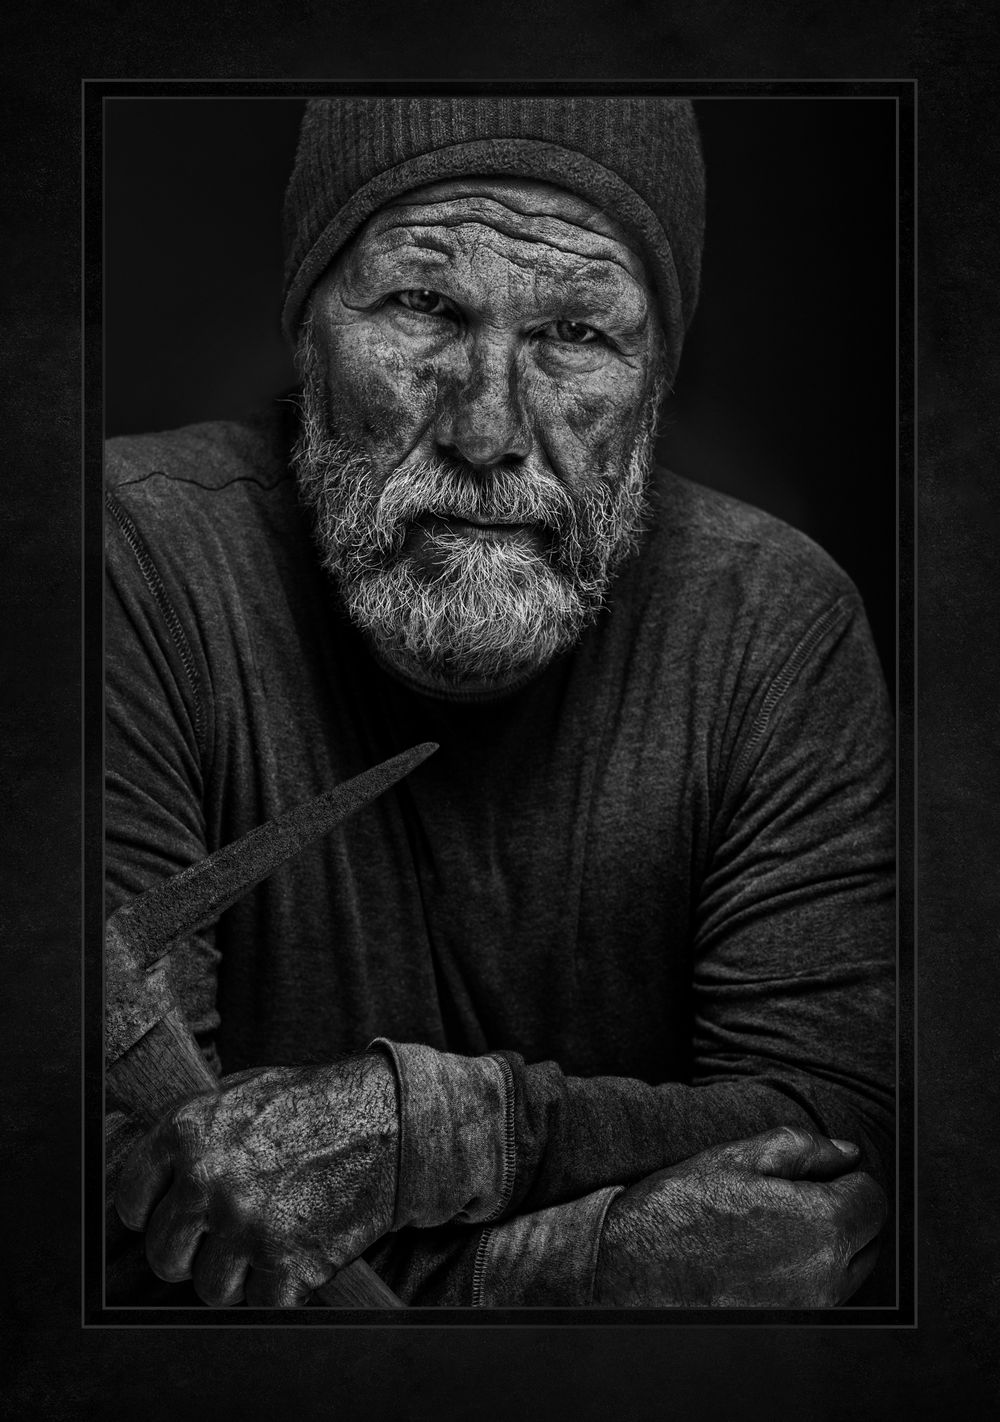 Cinmatic Portraits Miner portrait black and white with pick axe